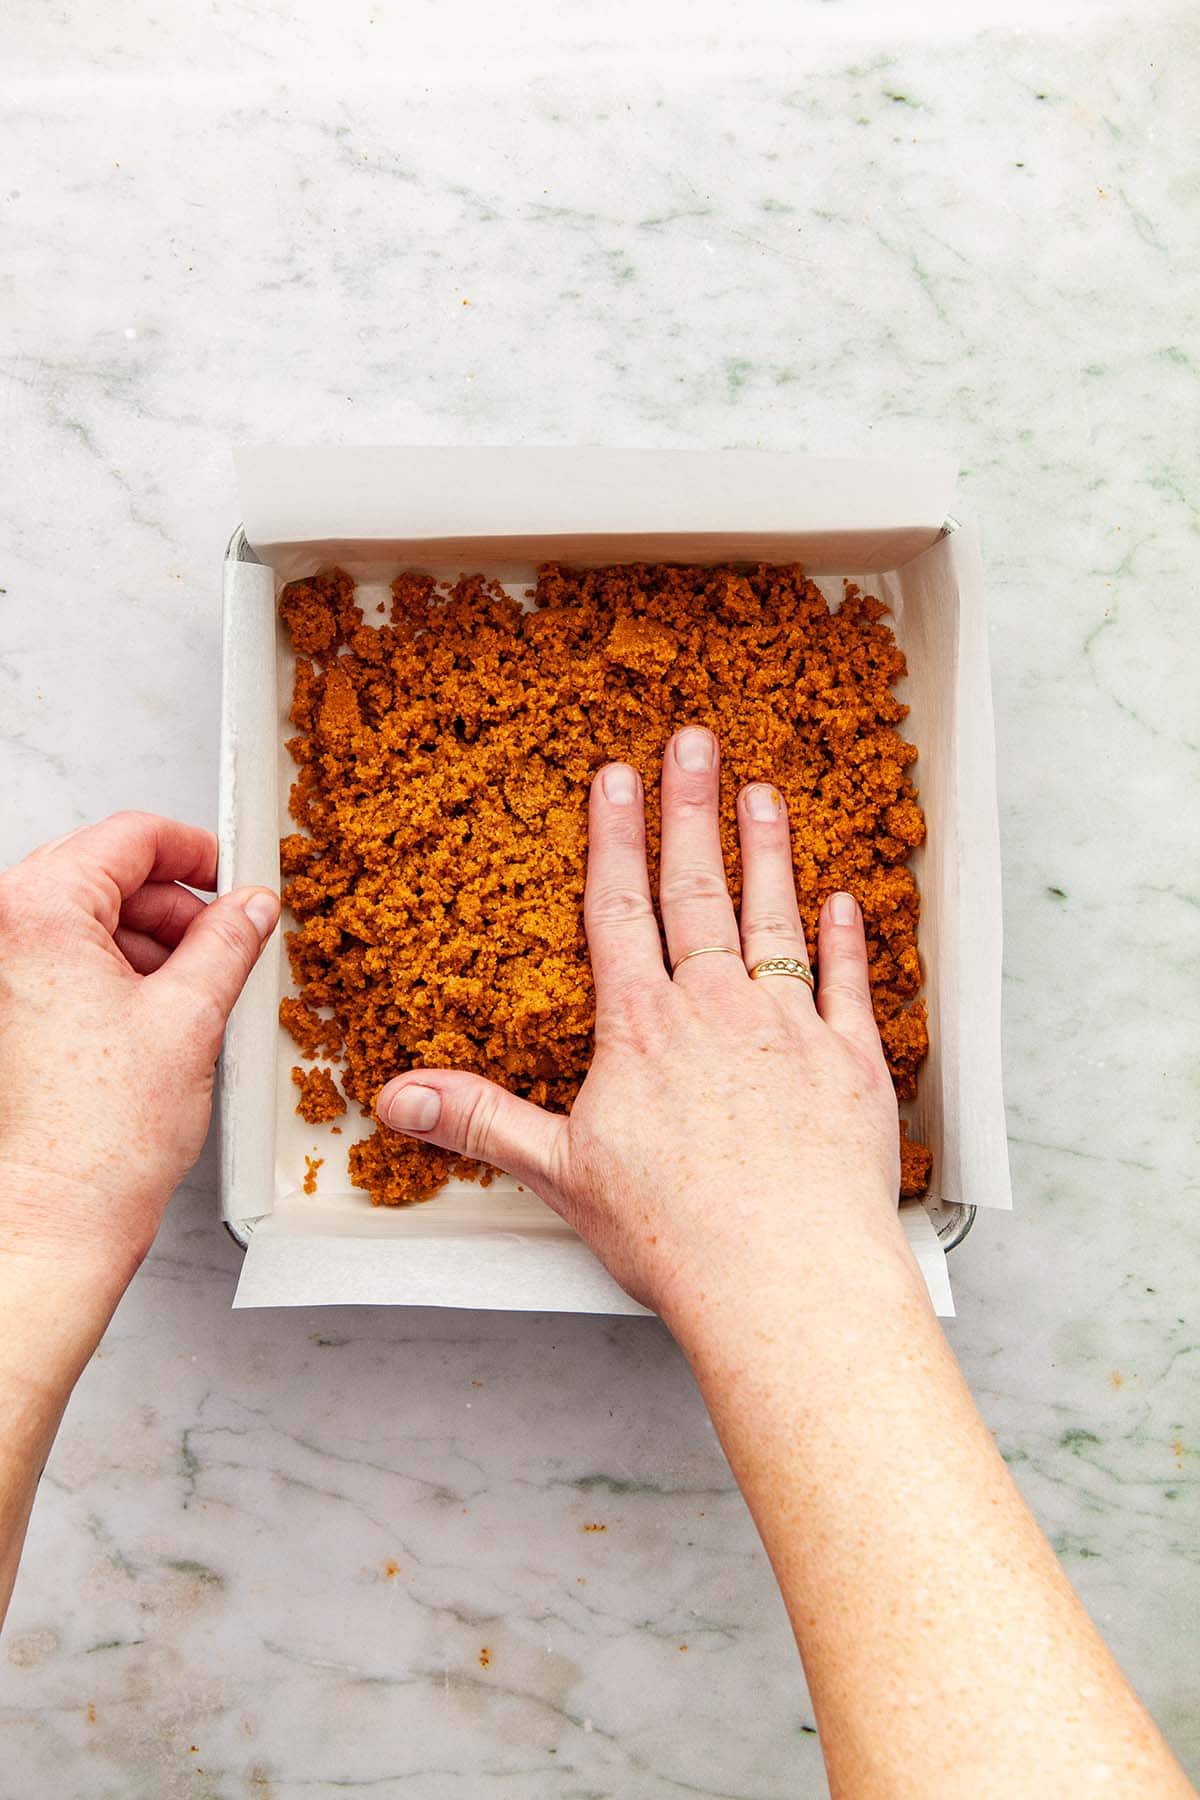 A hand beginning to press graham crumbs into a square pan.